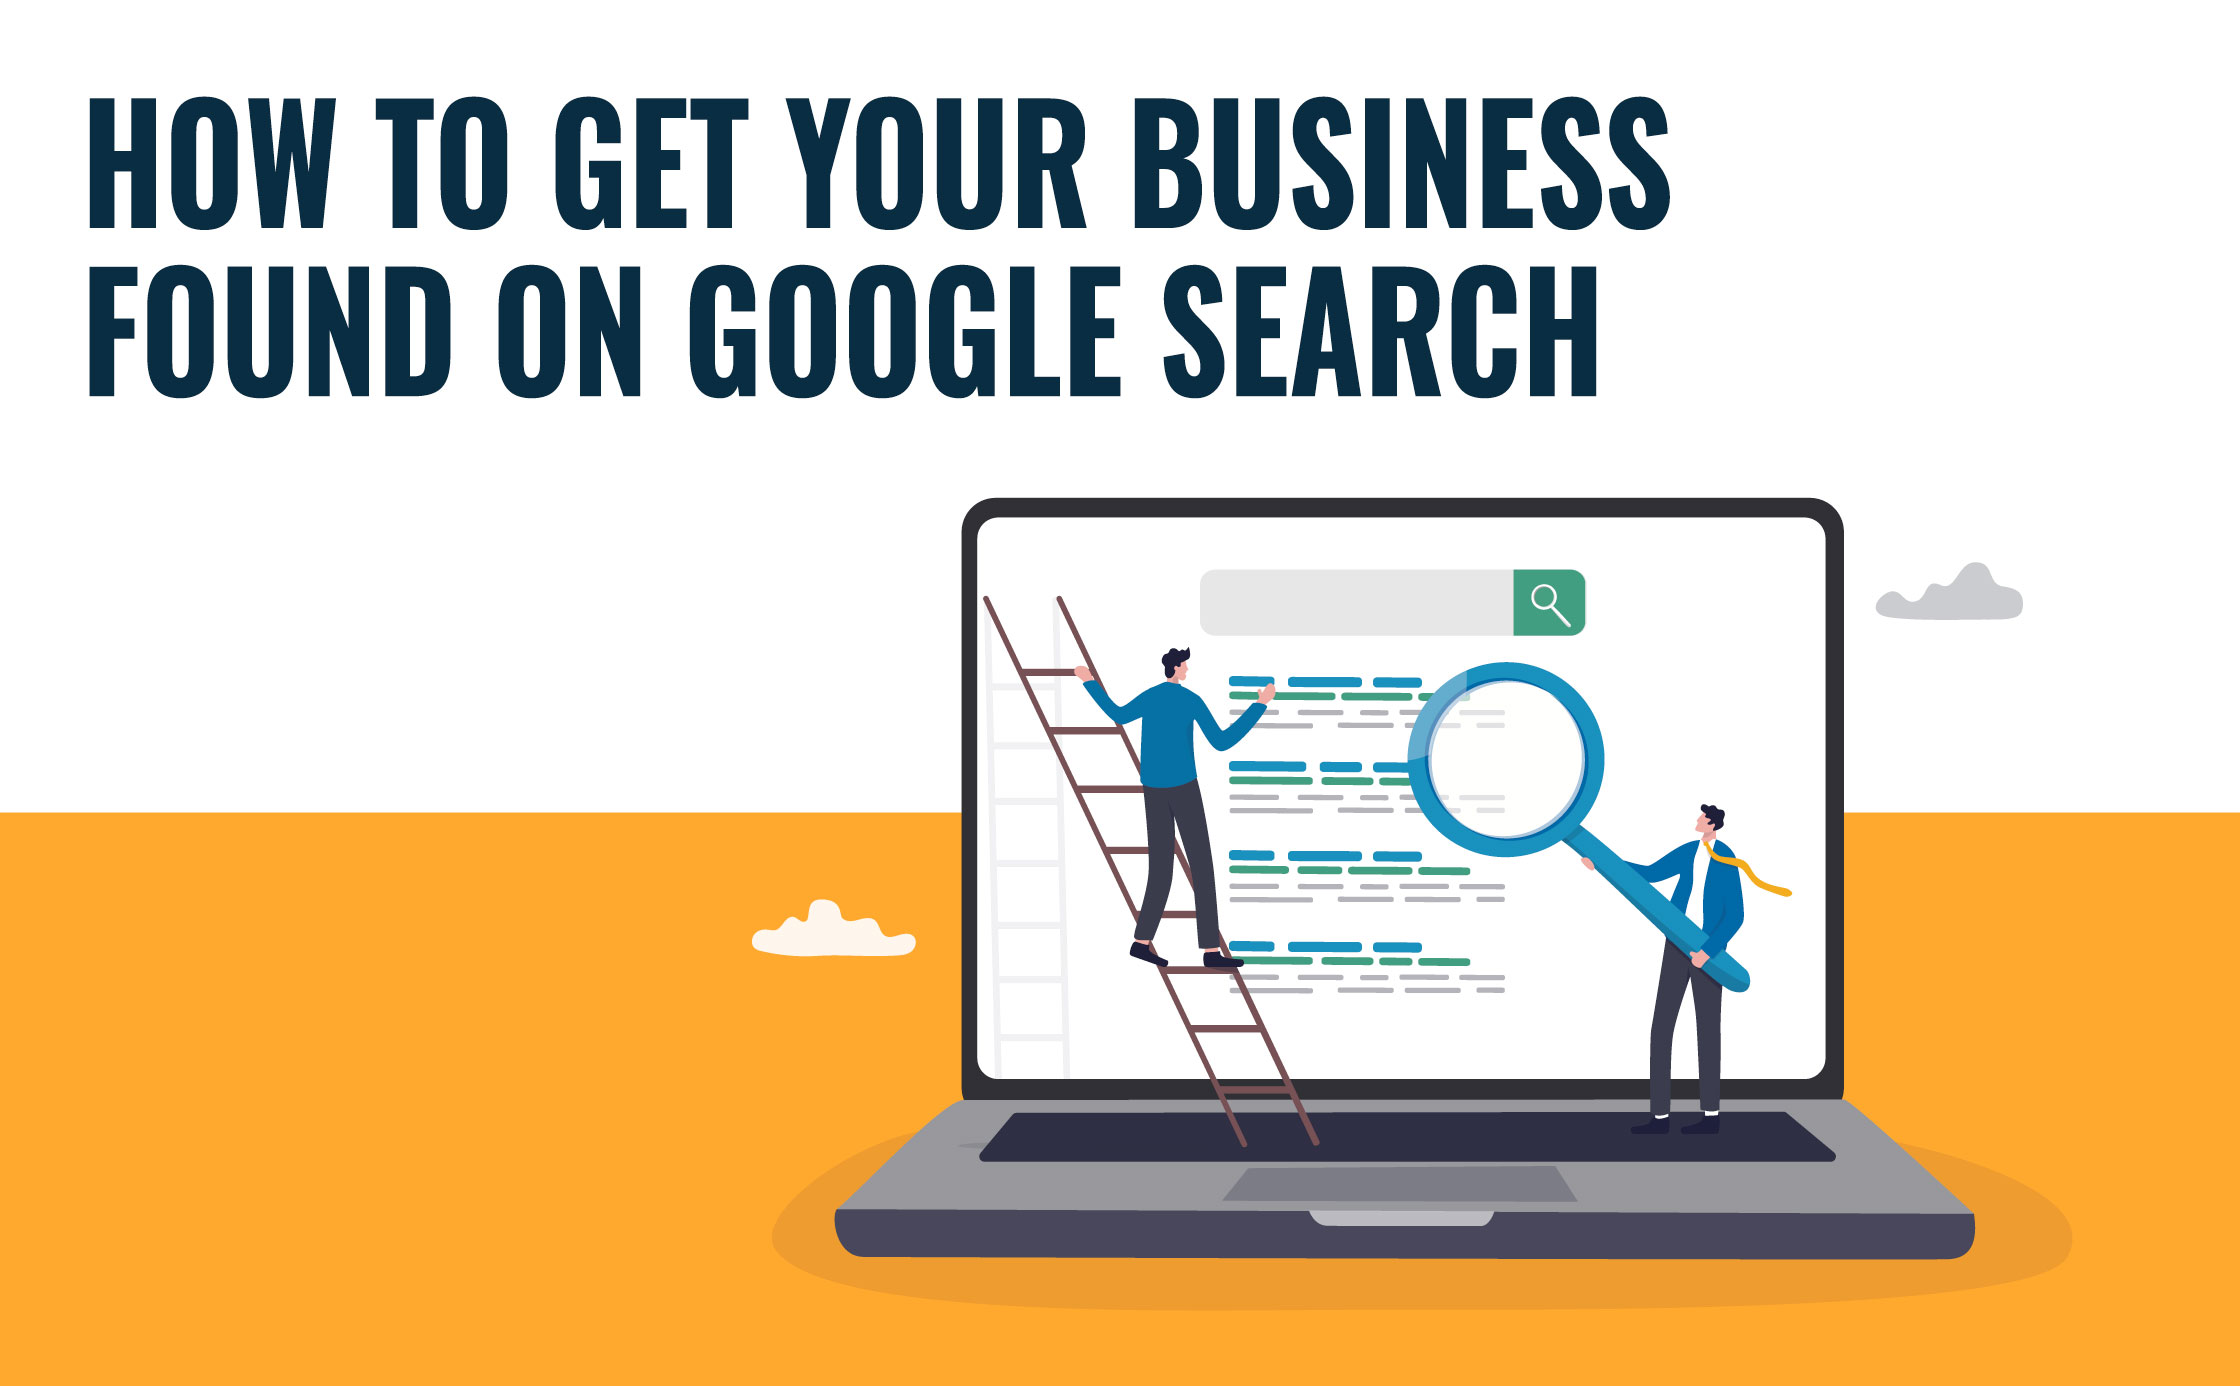 How to Get Your Business Found on Google Search